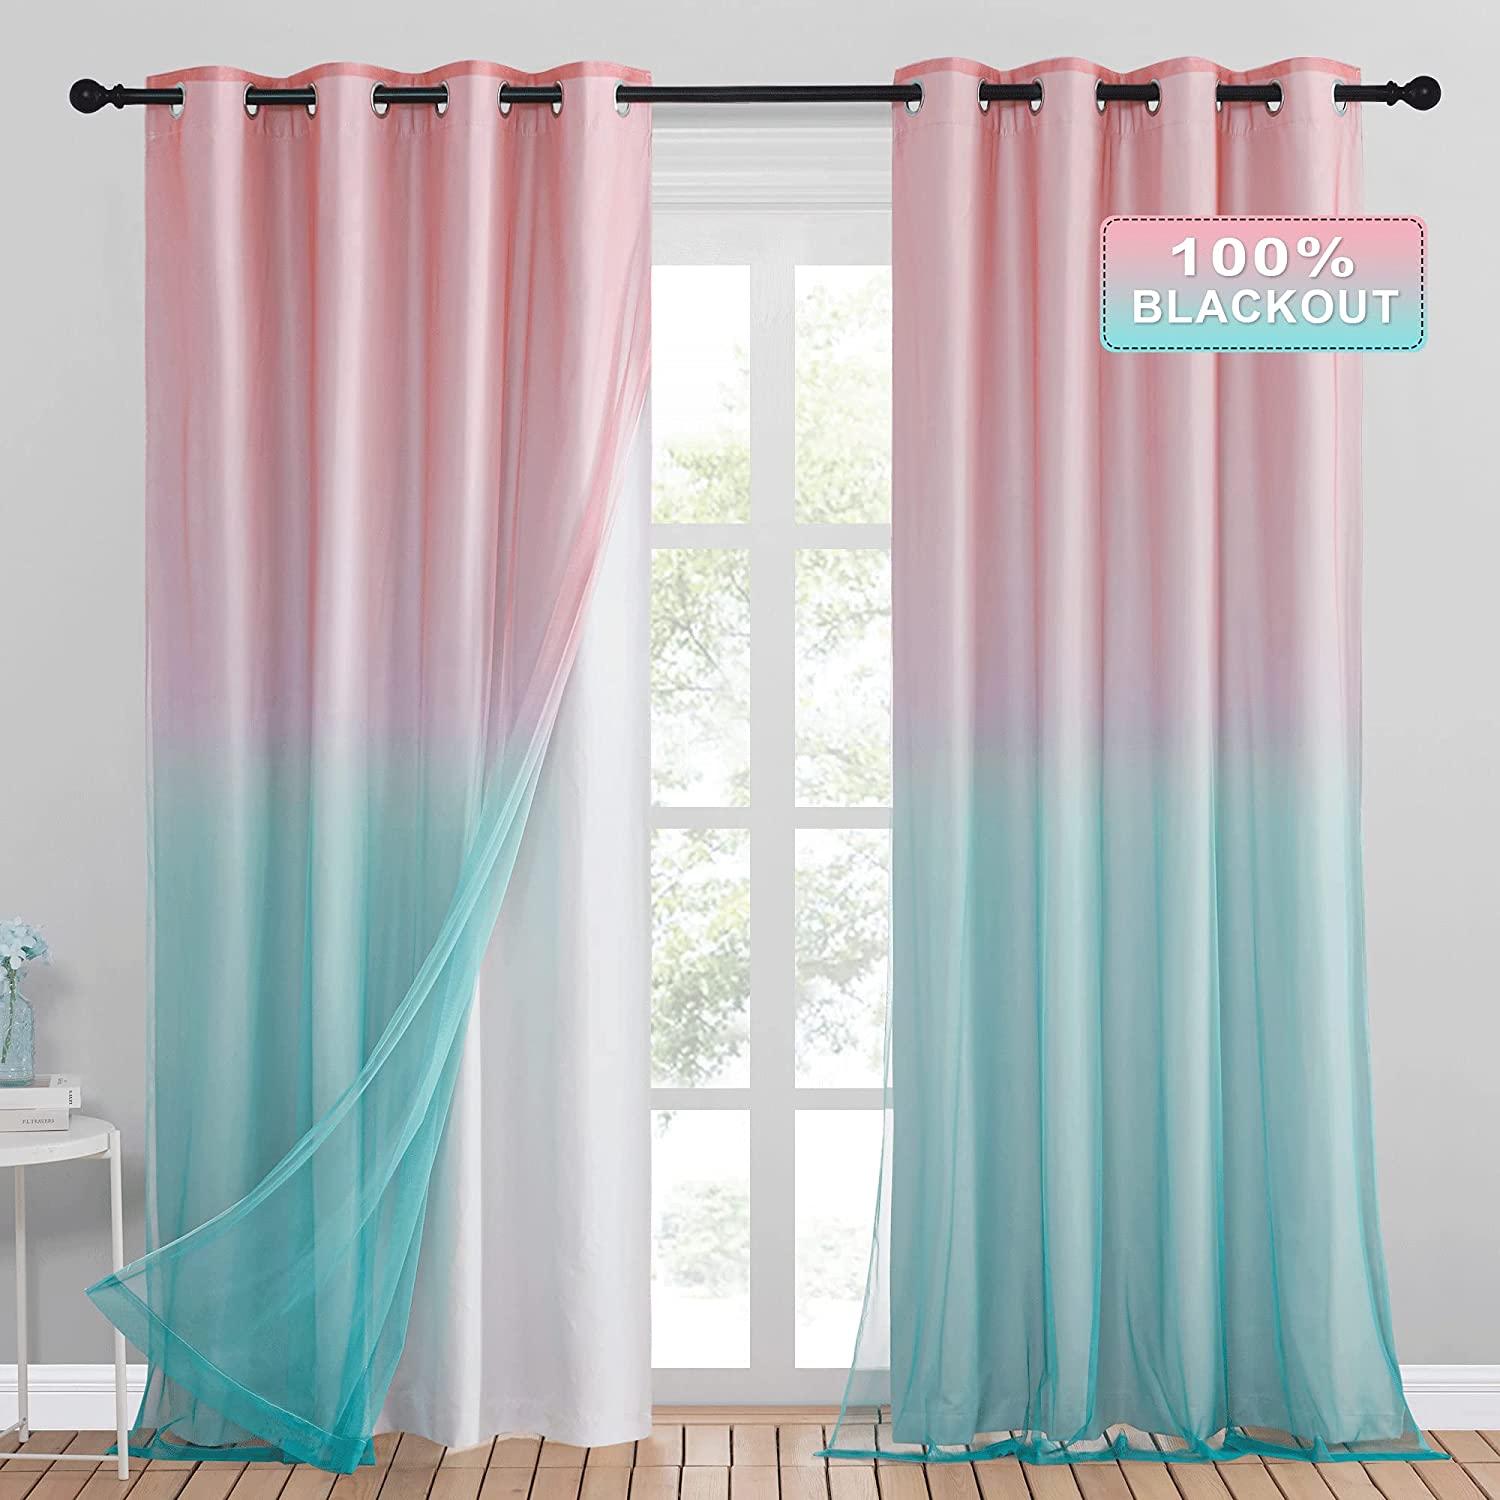 Blackout  Curtain With Pastel Rainbow Sheer Curtain Overlay 2 Panels KGORGE Store